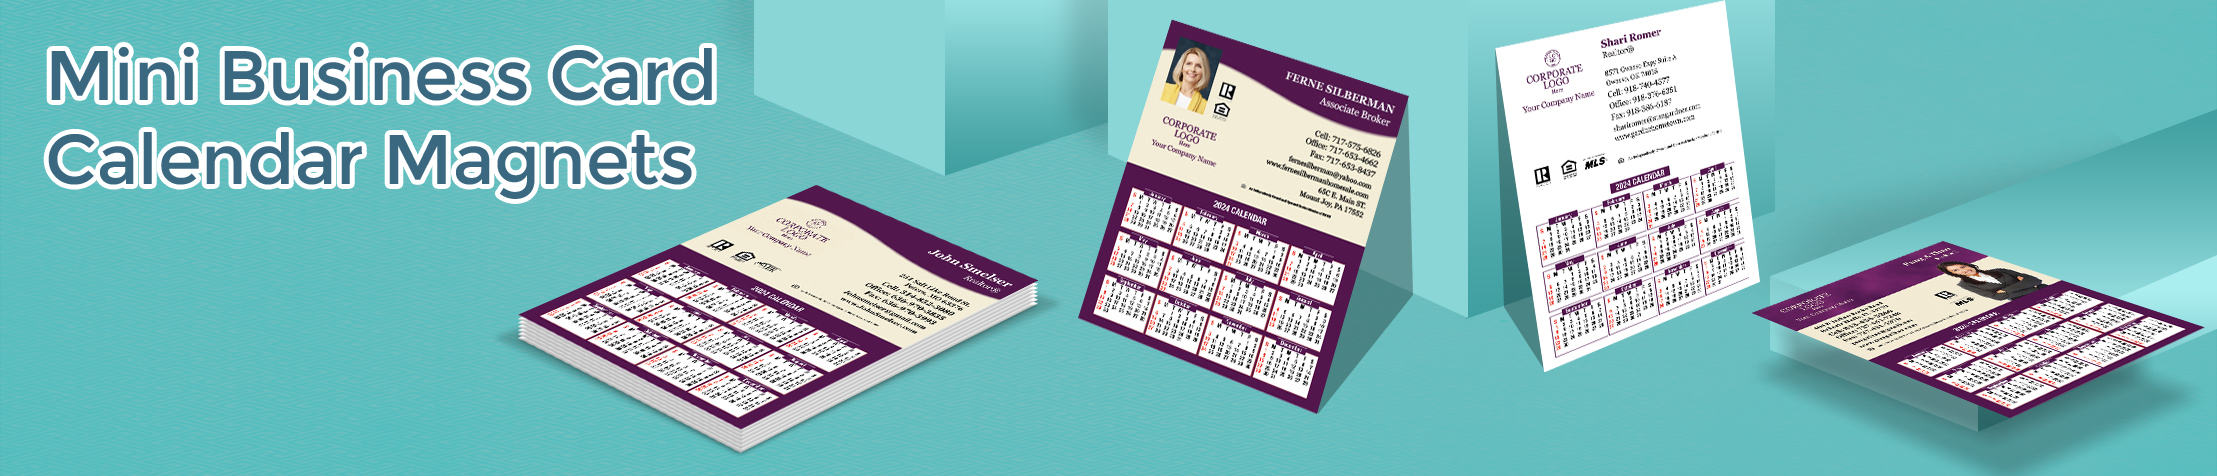 Berkshire Hathaway Real Estate Mini Business Card Calendar Magnets - Berkshire Hathaway 2019 calendars with photo and contact info, 3.5” by 4.25” | BestPrintBuy.com